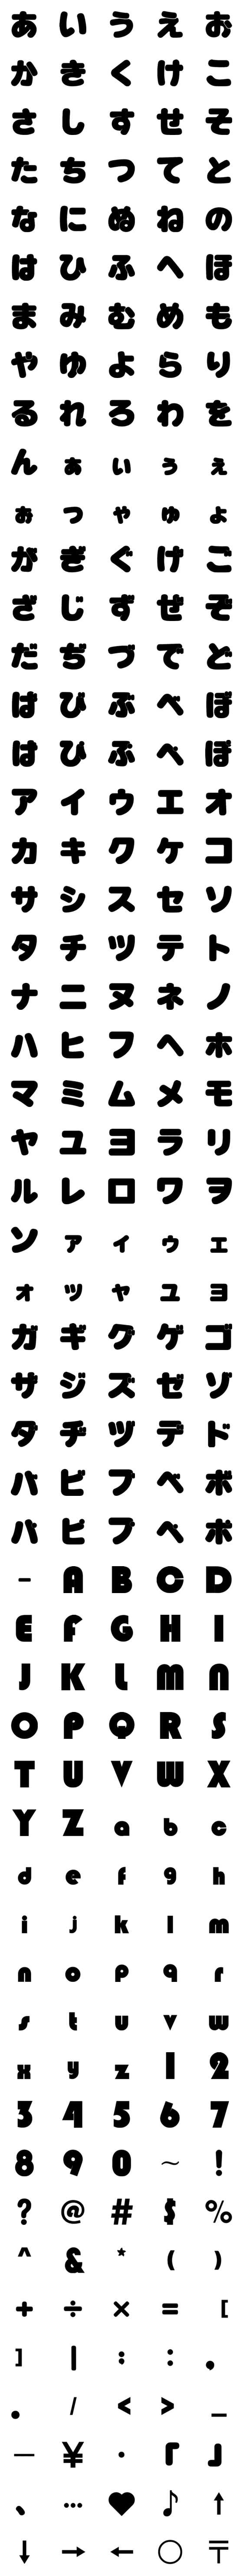 [LINE絵文字]コロコロ絵文字〈一文字〉の画像一覧